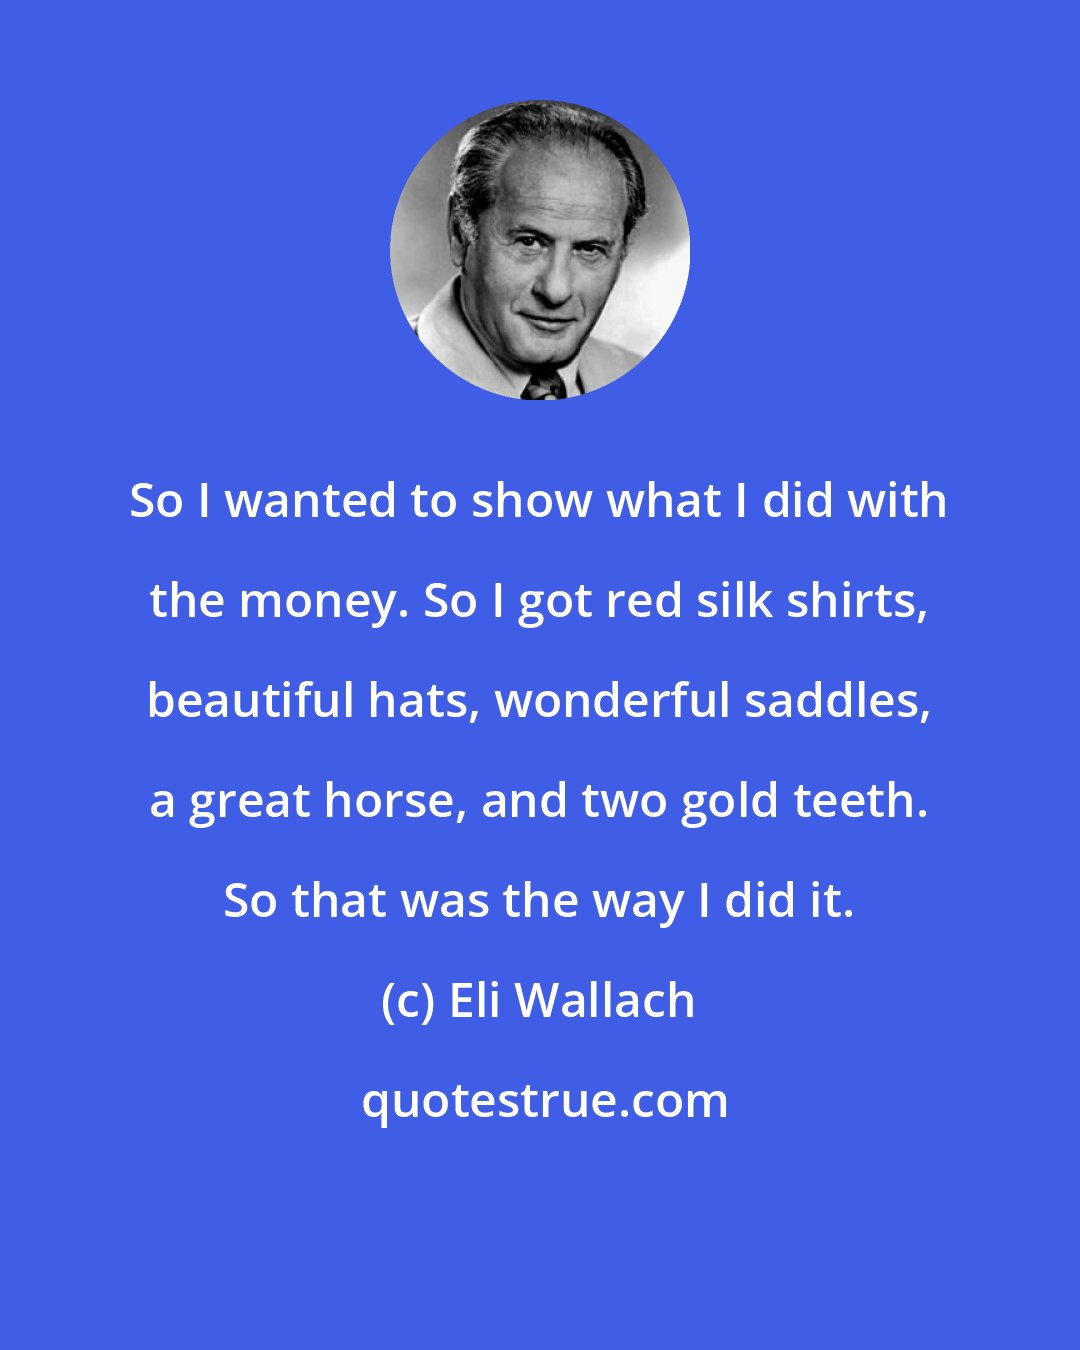 Eli Wallach: So I wanted to show what I did with the money. So I got red silk shirts, beautiful hats, wonderful saddles, a great horse, and two gold teeth. So that was the way I did it.